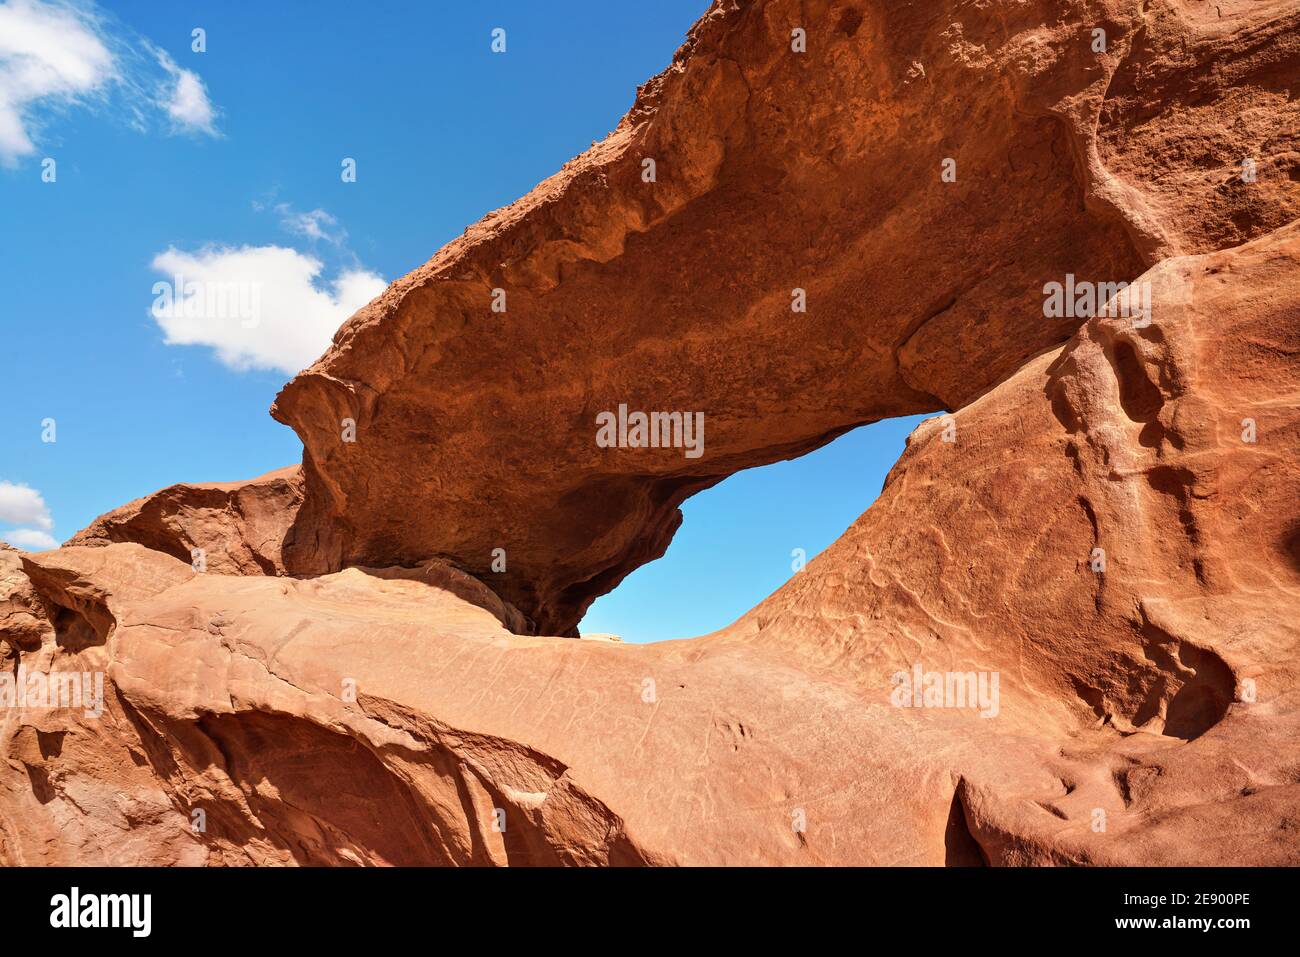 Little arc or small rock window formation in Wadi Rum desert, bright sun shines on red dust and rocks, blue sky above Stock Photo